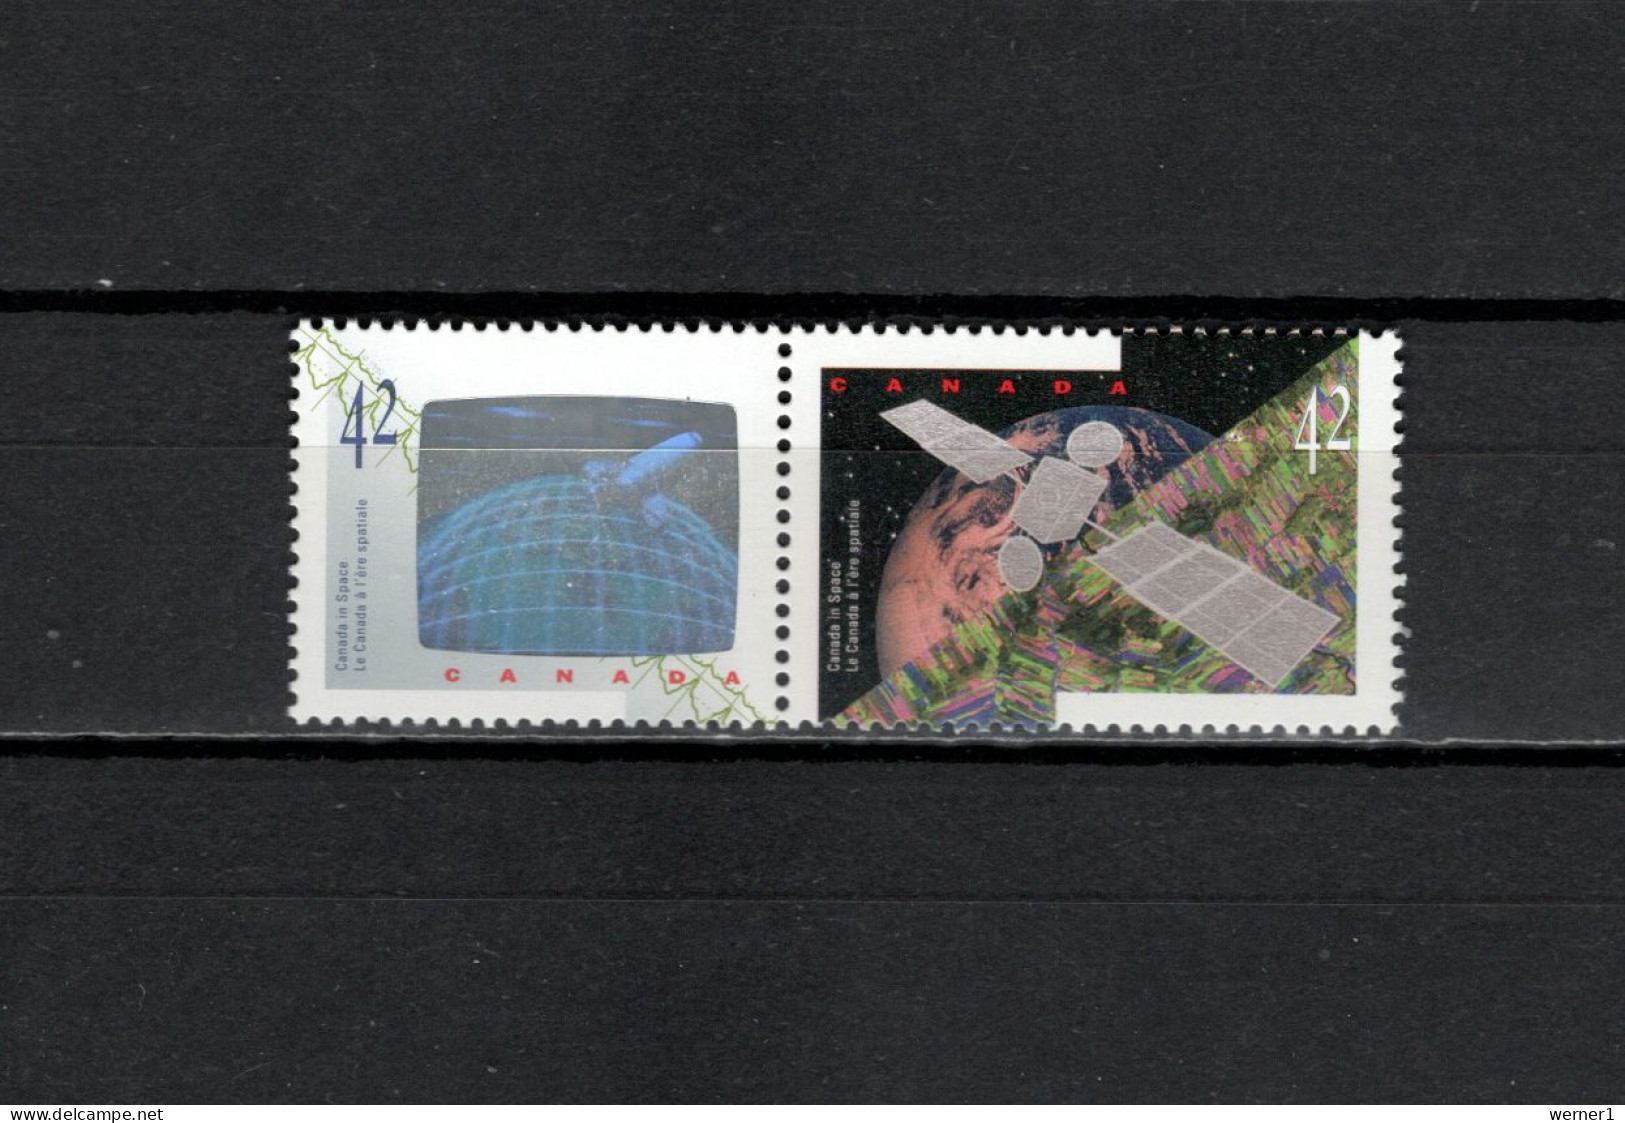 Canada 1992 Space Missions Set Of 2 With Holograph MNH - North  America